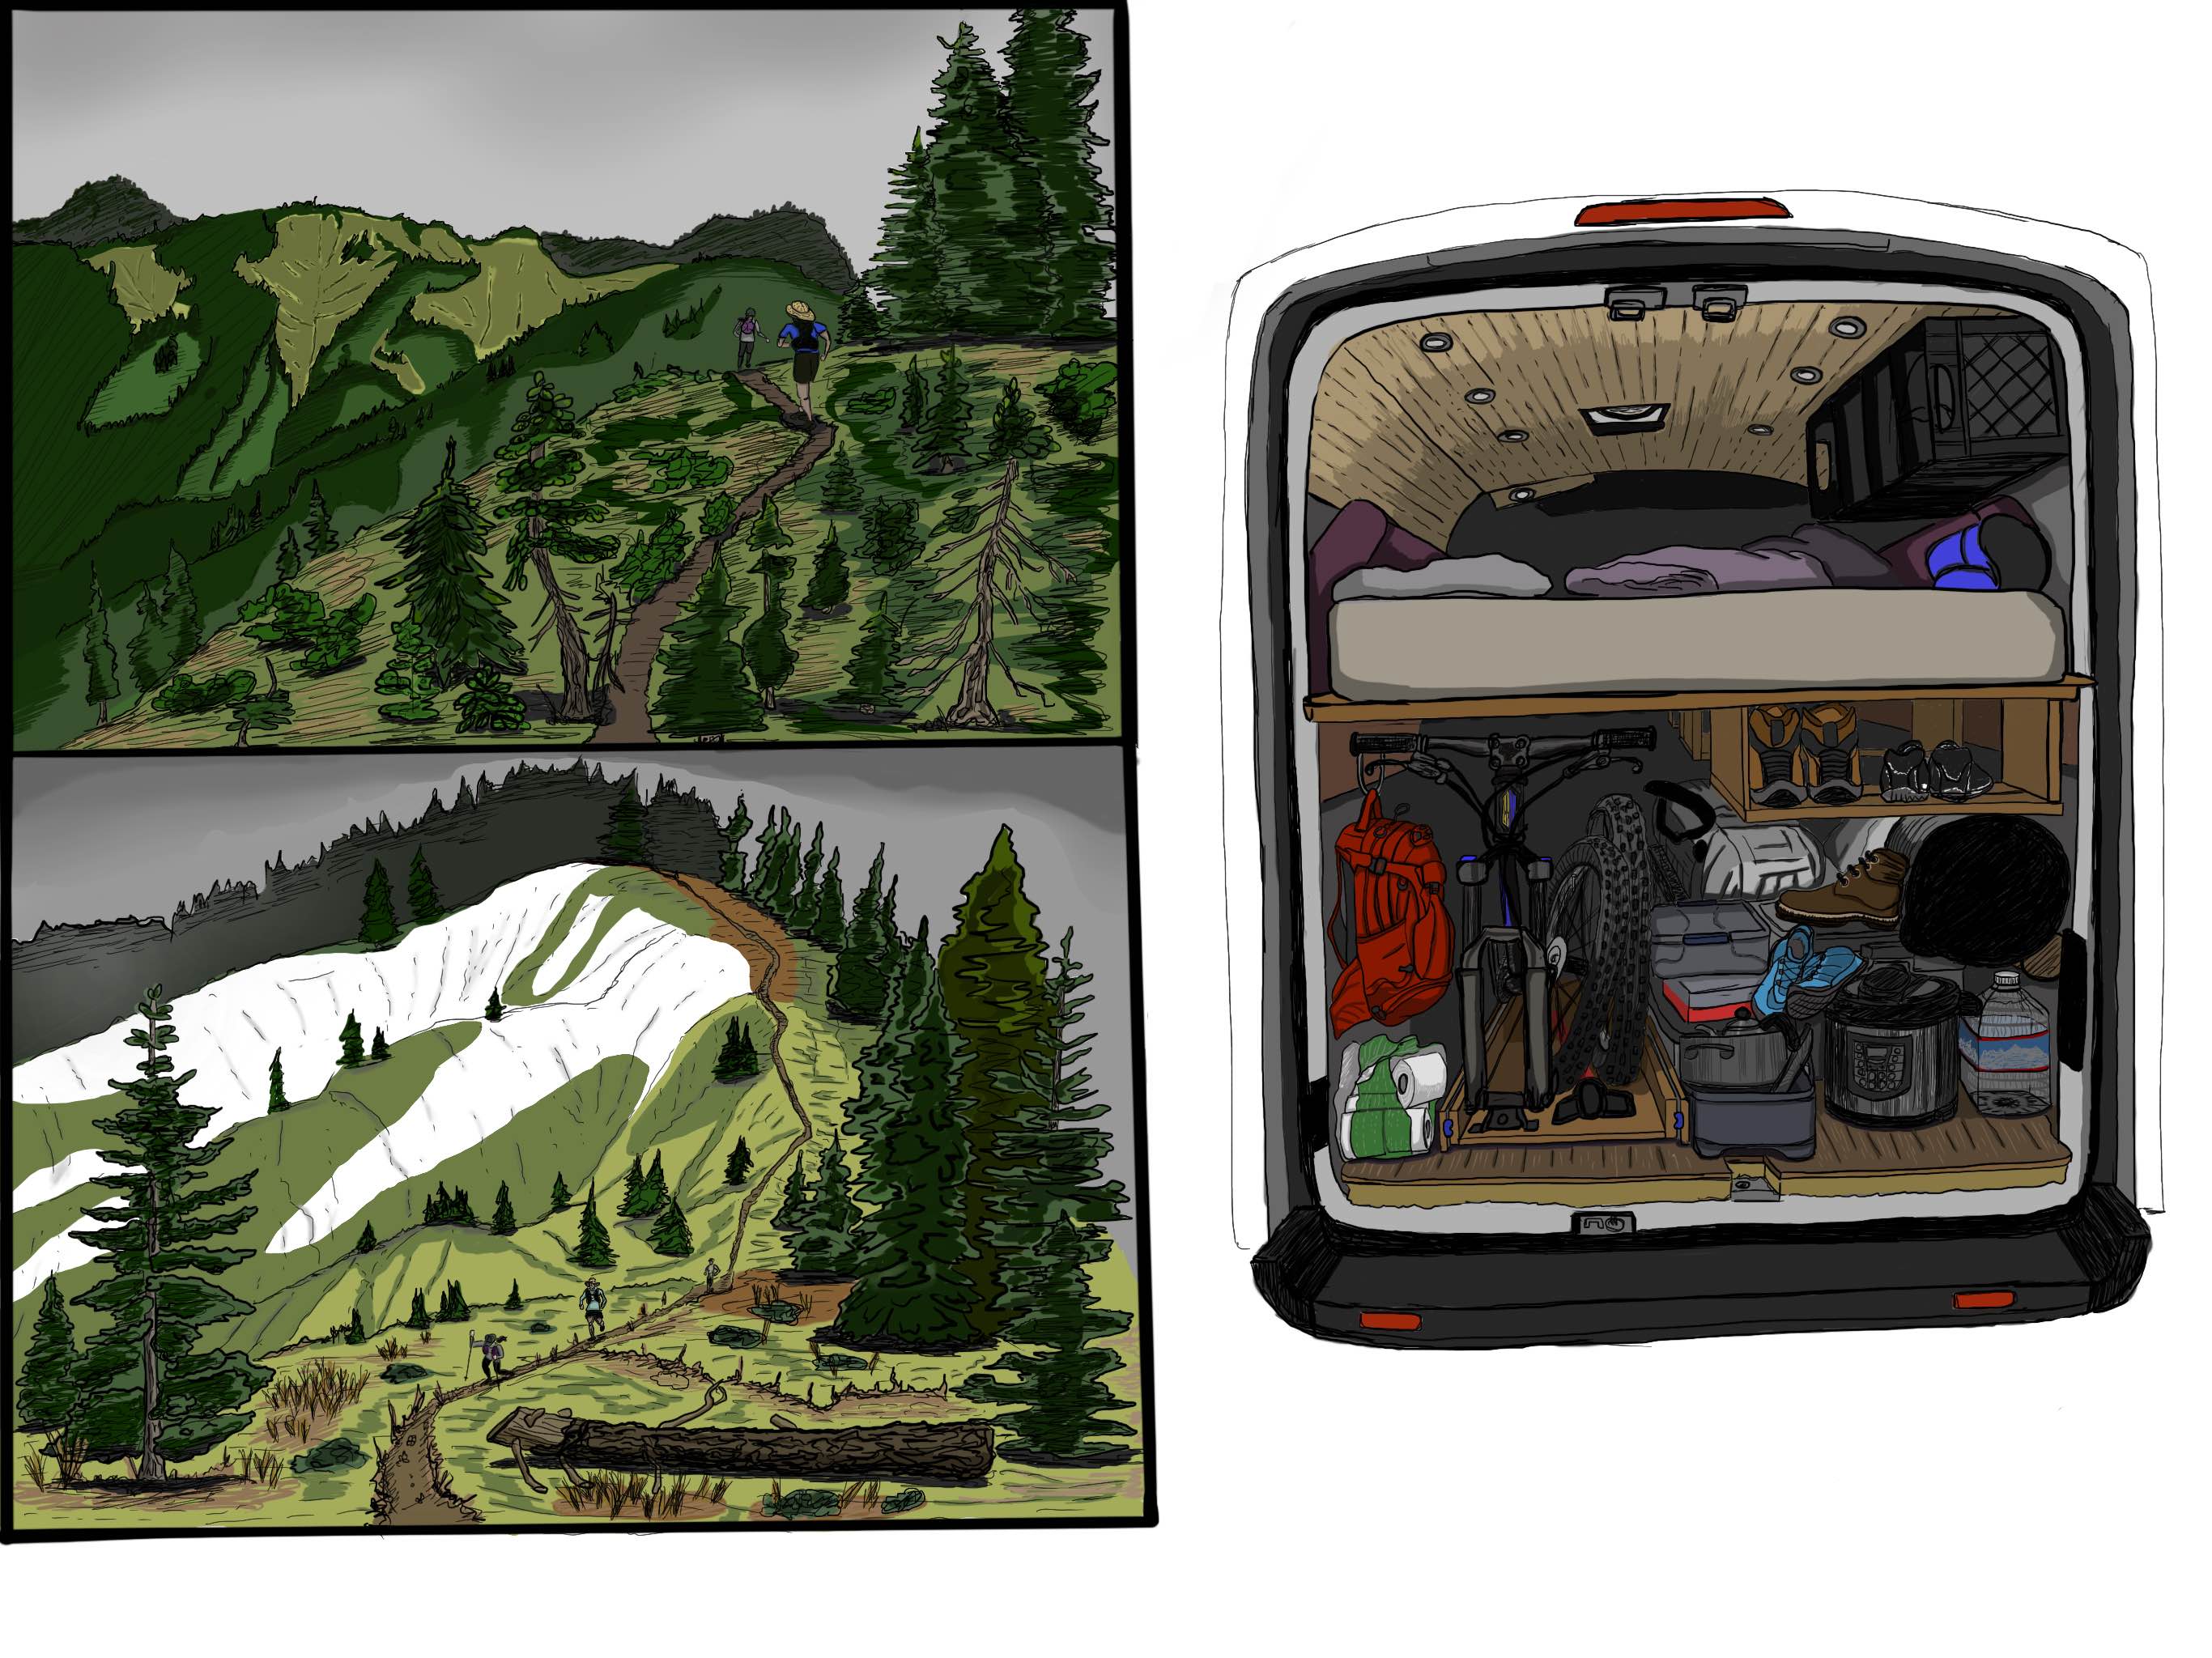 Trail running in the Northern Cascades, WA and a view of our adventure van (NSBG) gear garage under our bed.